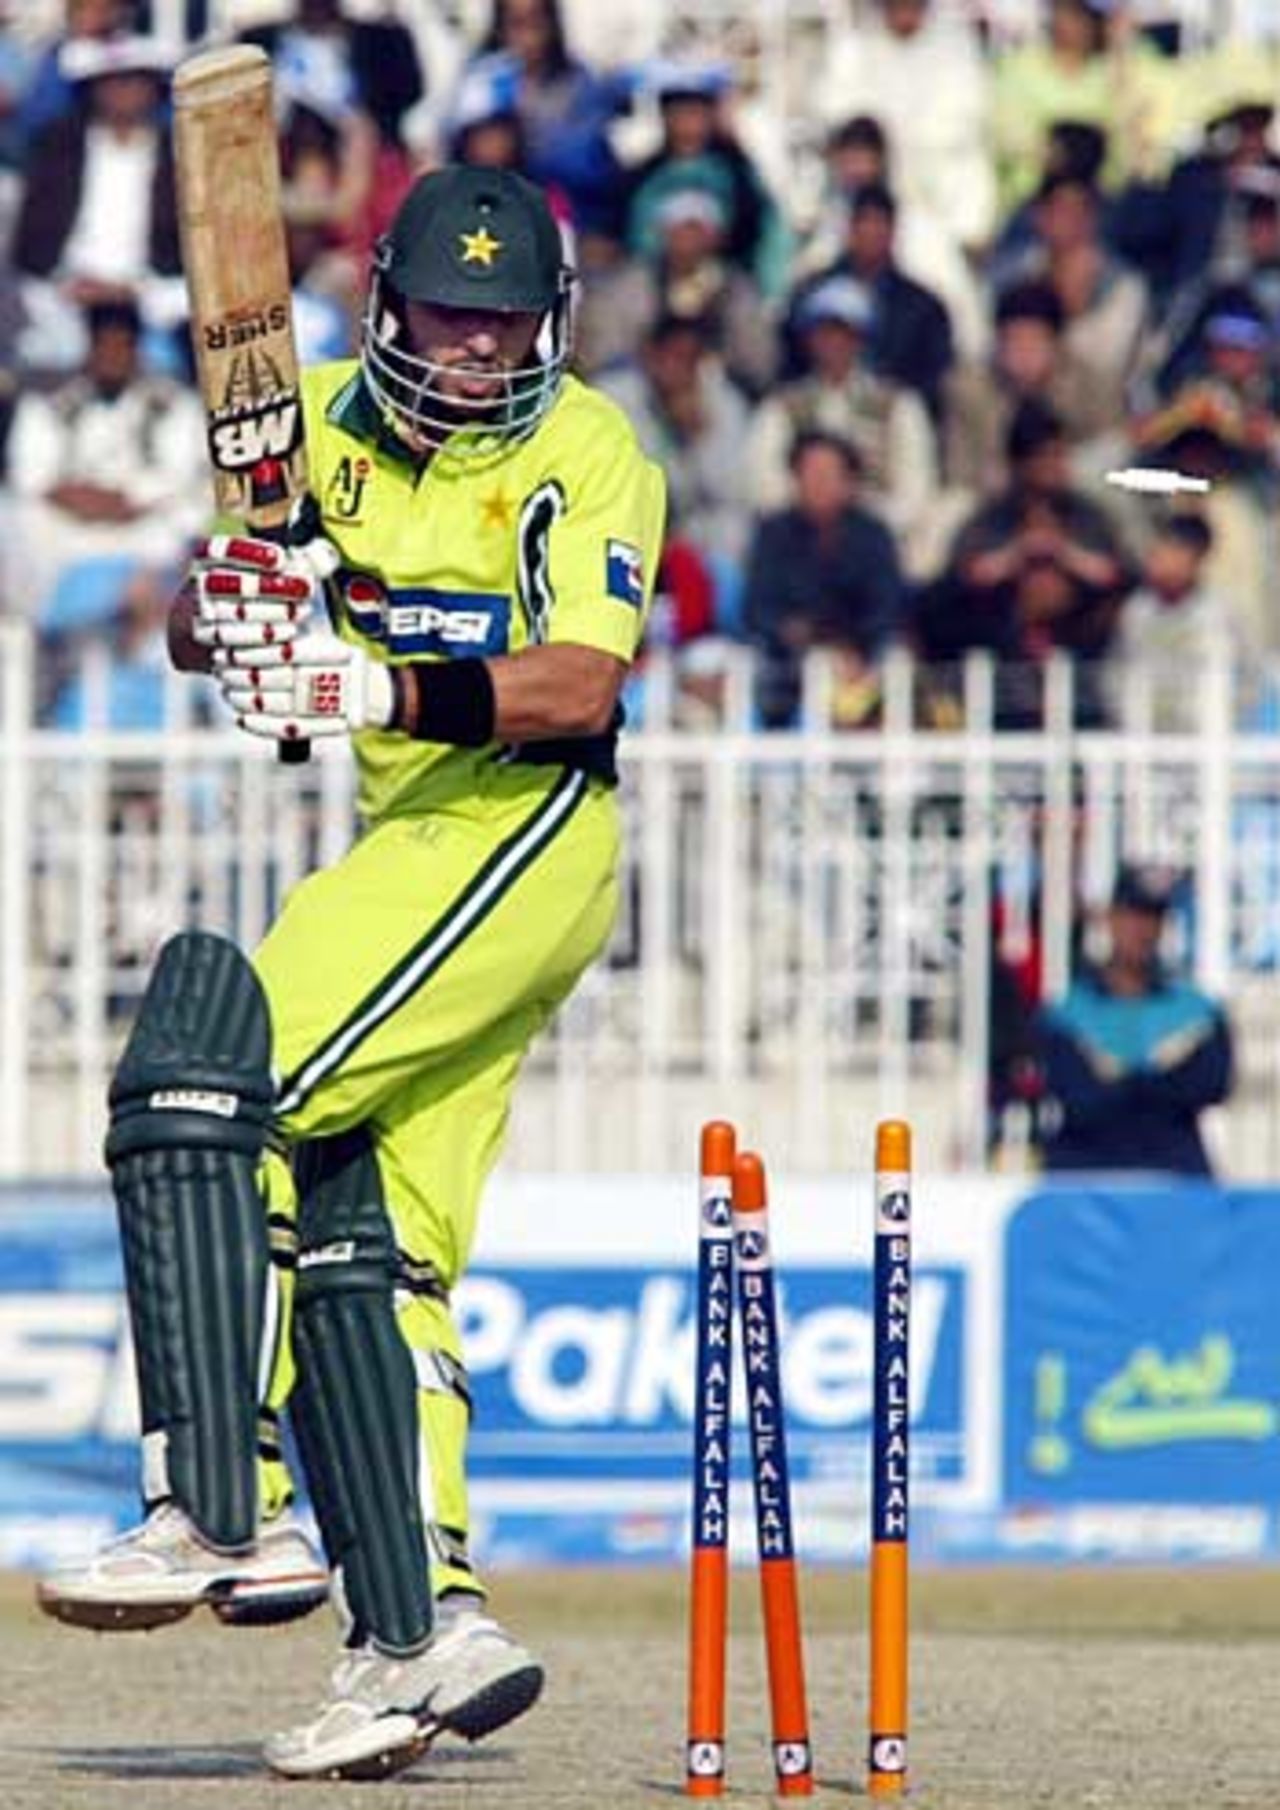 Shahid Afridi misses a pull at a slower ball, becoming his first of Liam Plunkett's two wickets in two balls, Pakistan v England, 4th ODI, Rawalpindi, December 19, 2005